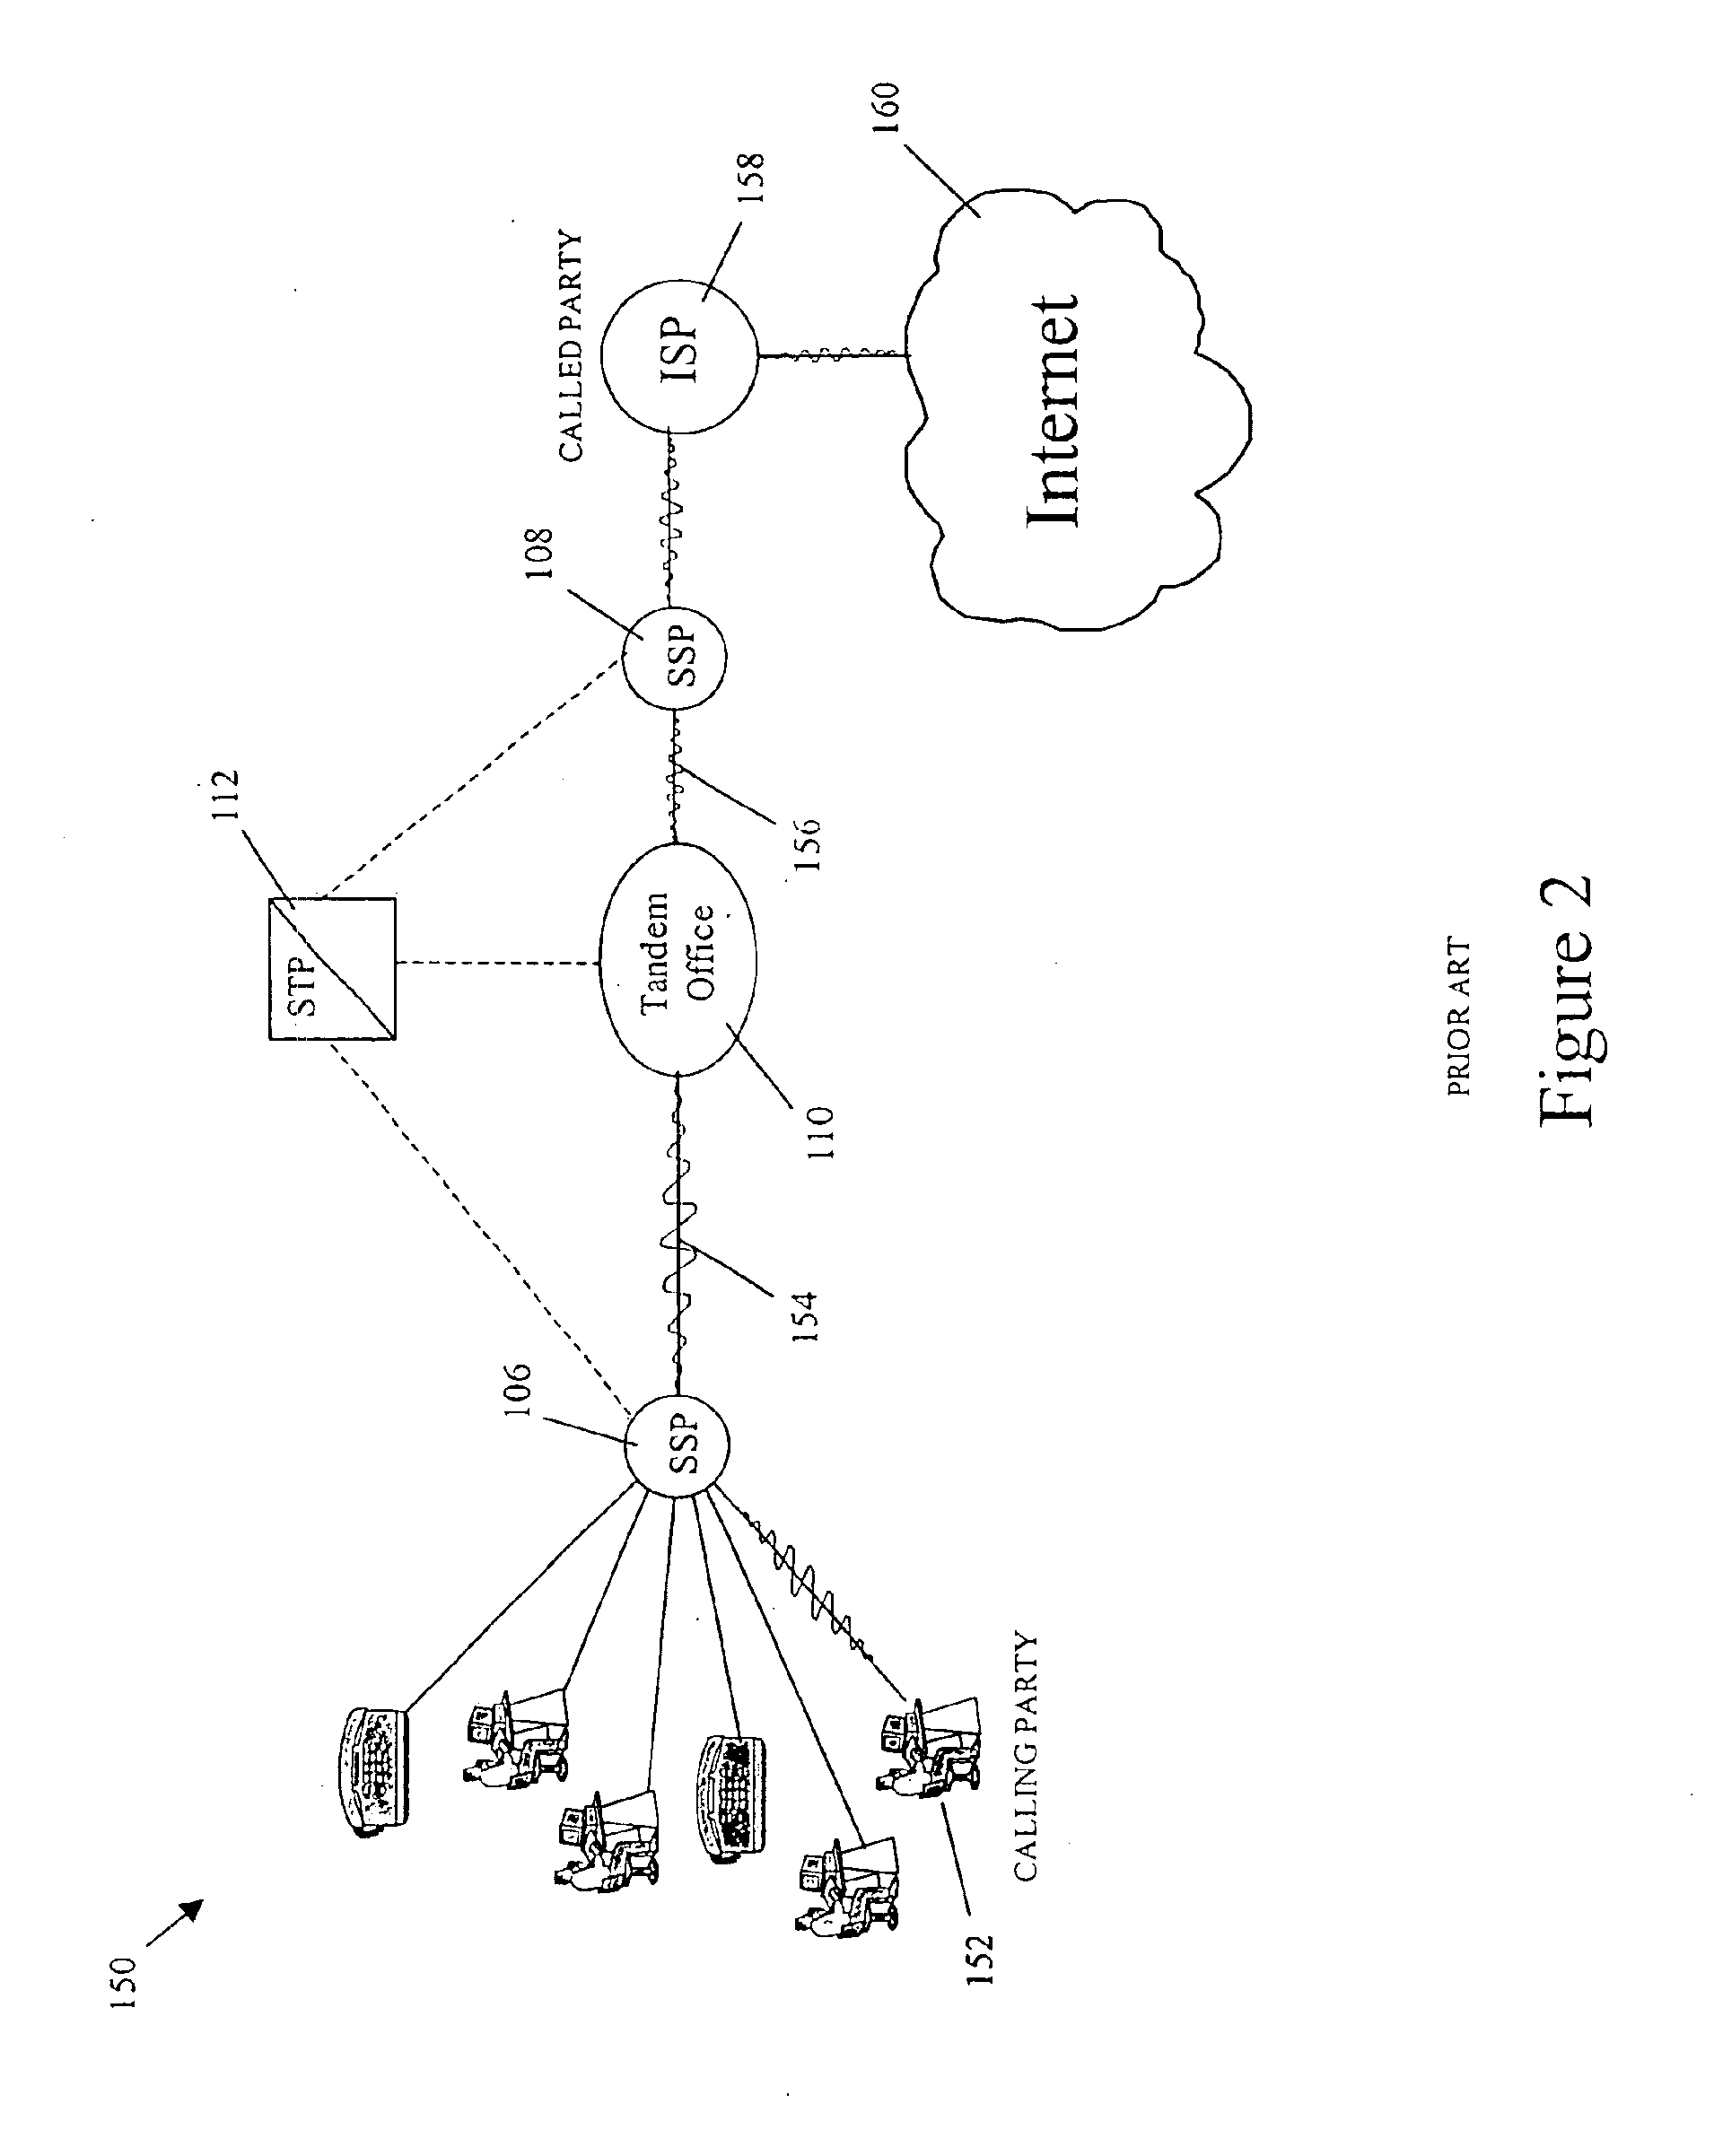 Methods and systems for routing signaling messages in a communications network using circuit identification code (CIC) information